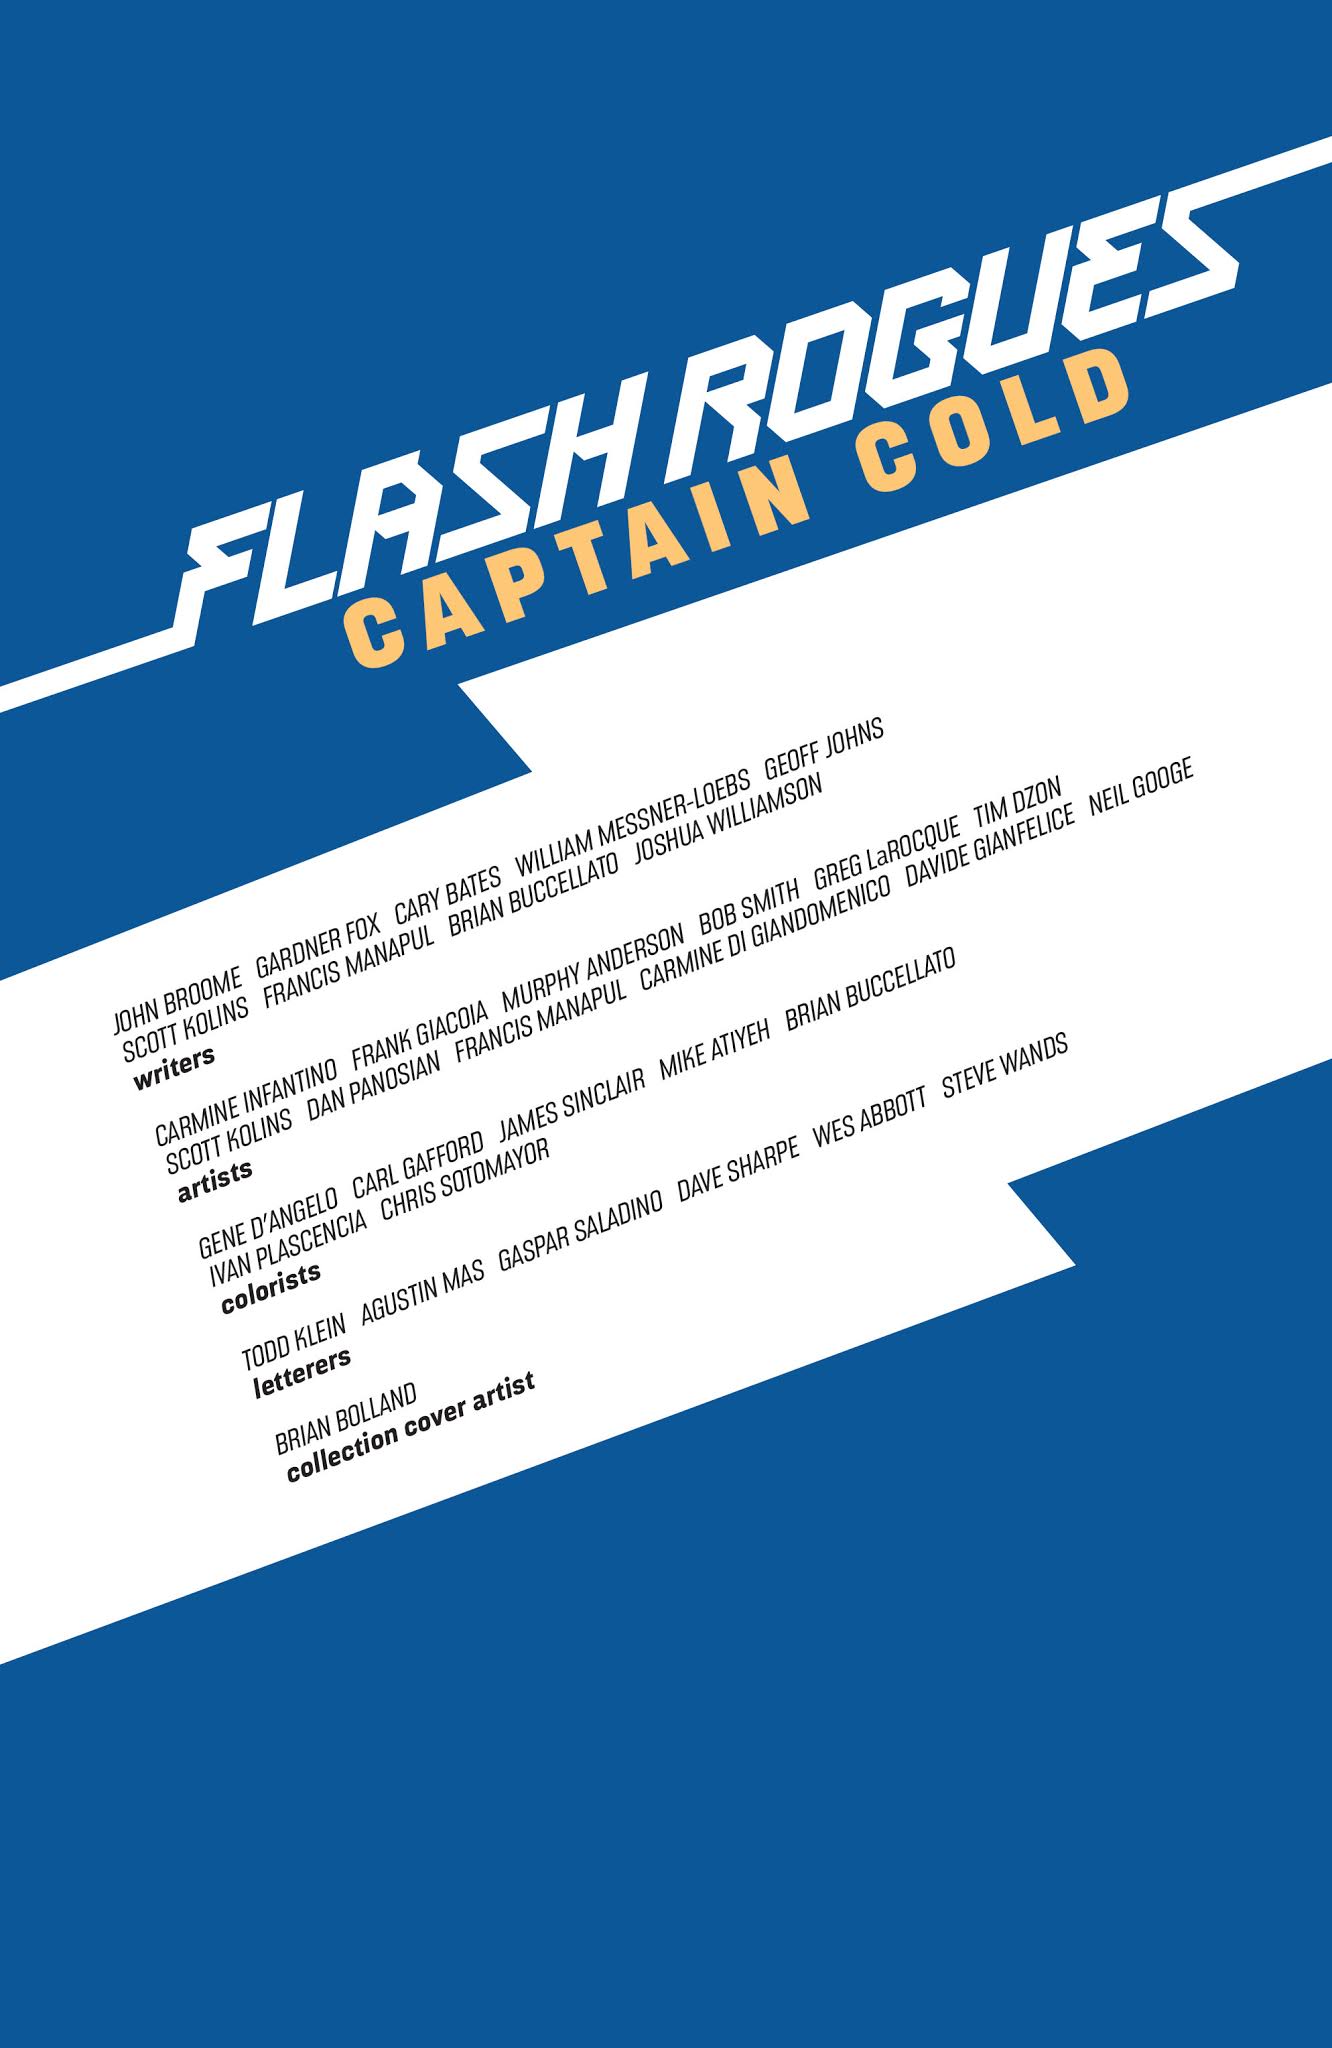 Read online Flash Rogues: Captain Cold comic -  Issue # TPB (Part 1) - 2